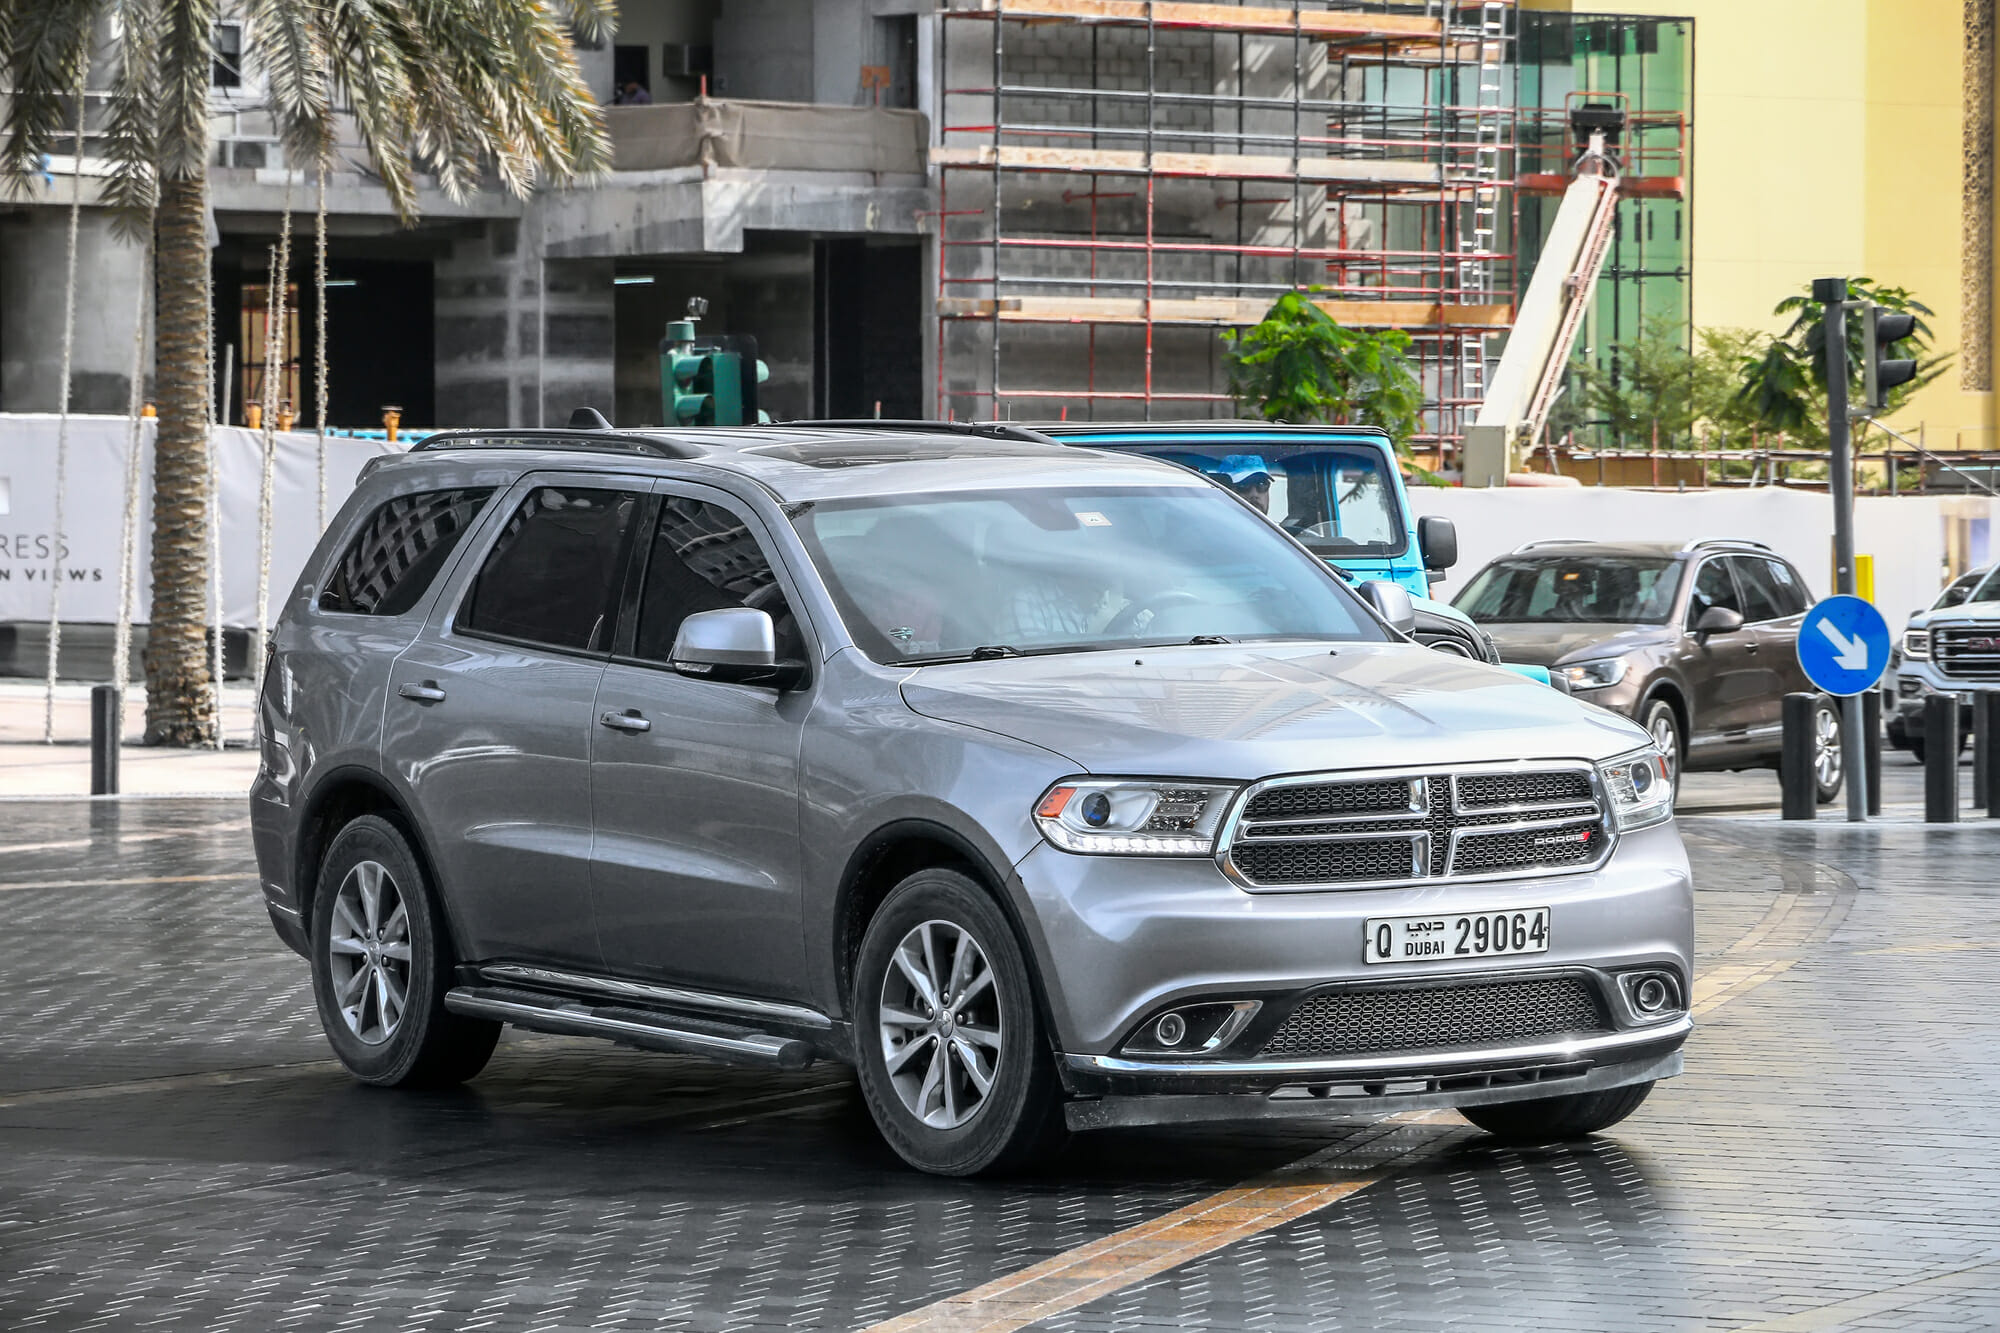 dodge rate meaning Dodge Durango: What Do its Safety Ratings Look Like